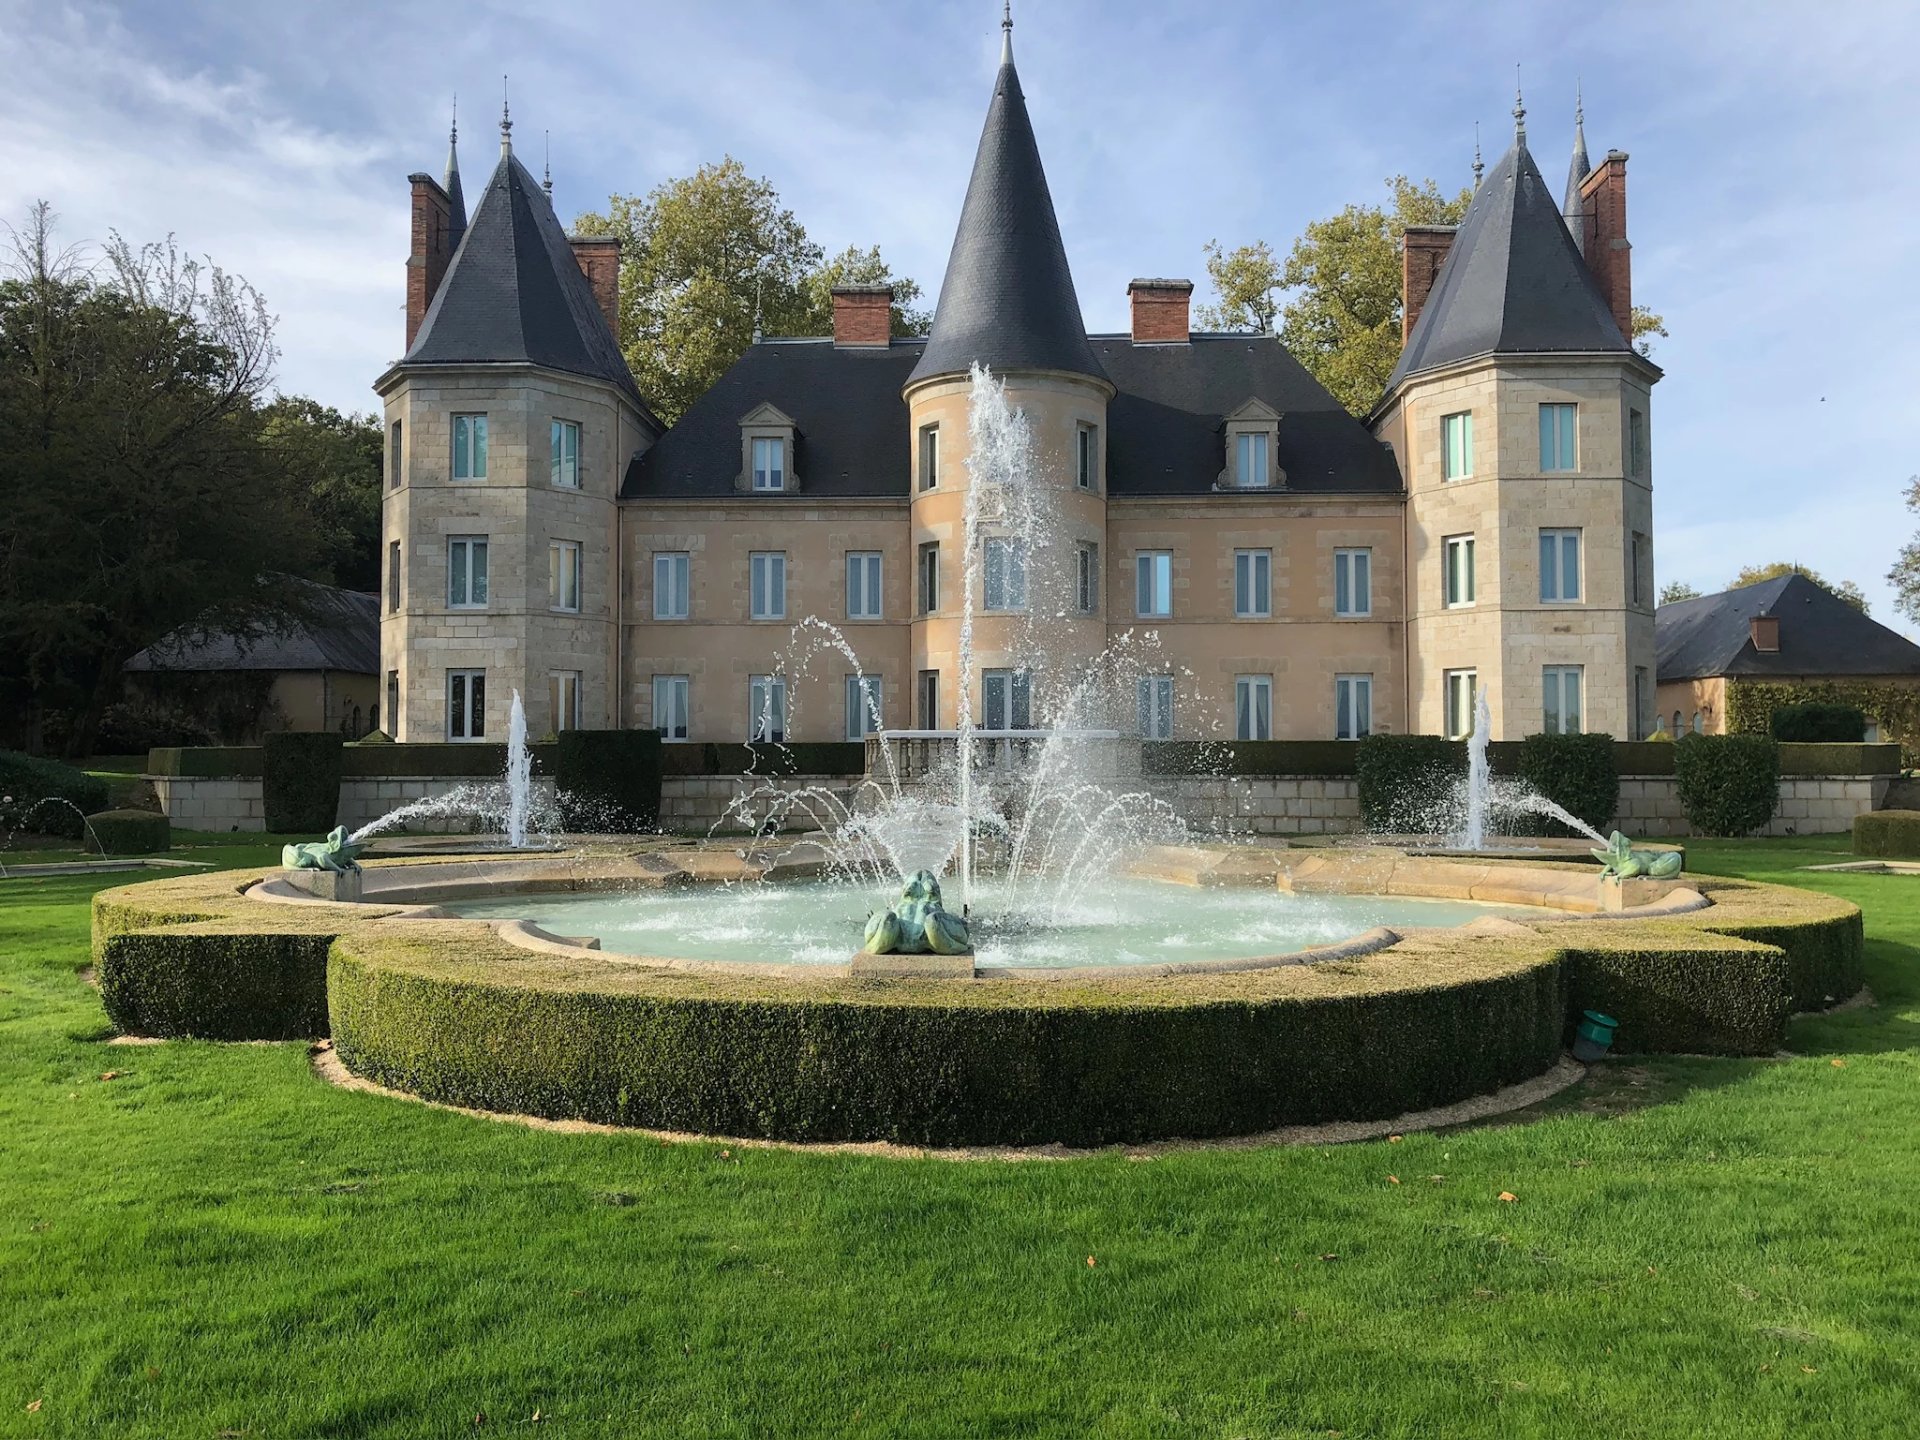 A fountain with statues shooting water in front of a chateau with roofs like castle spires.